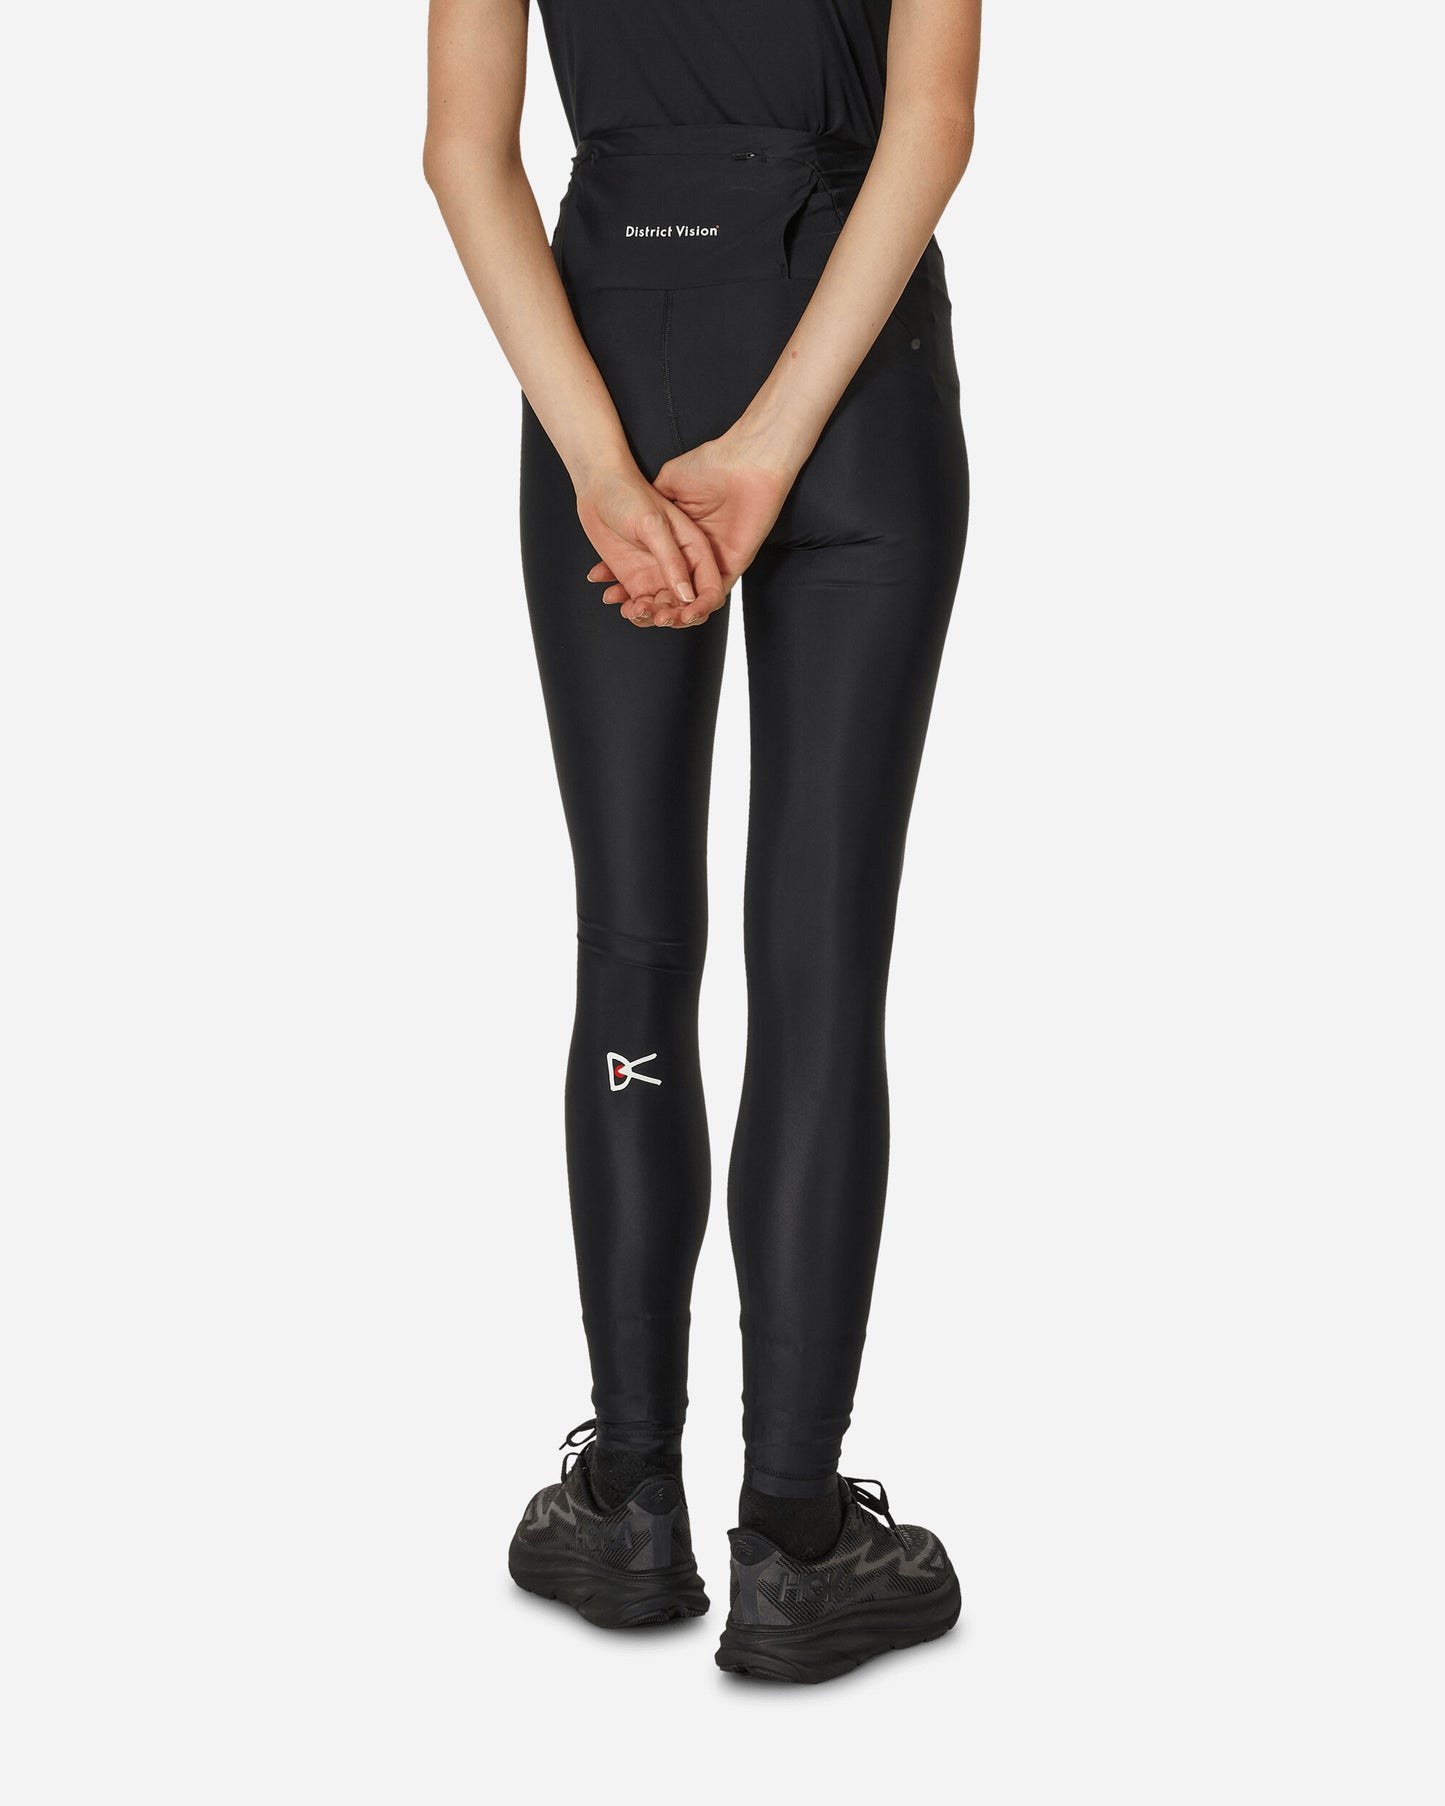 District Vision Wmns W Recycled Pocketed Full Lenght Tights Black Pants Track Pants DVW0005 B